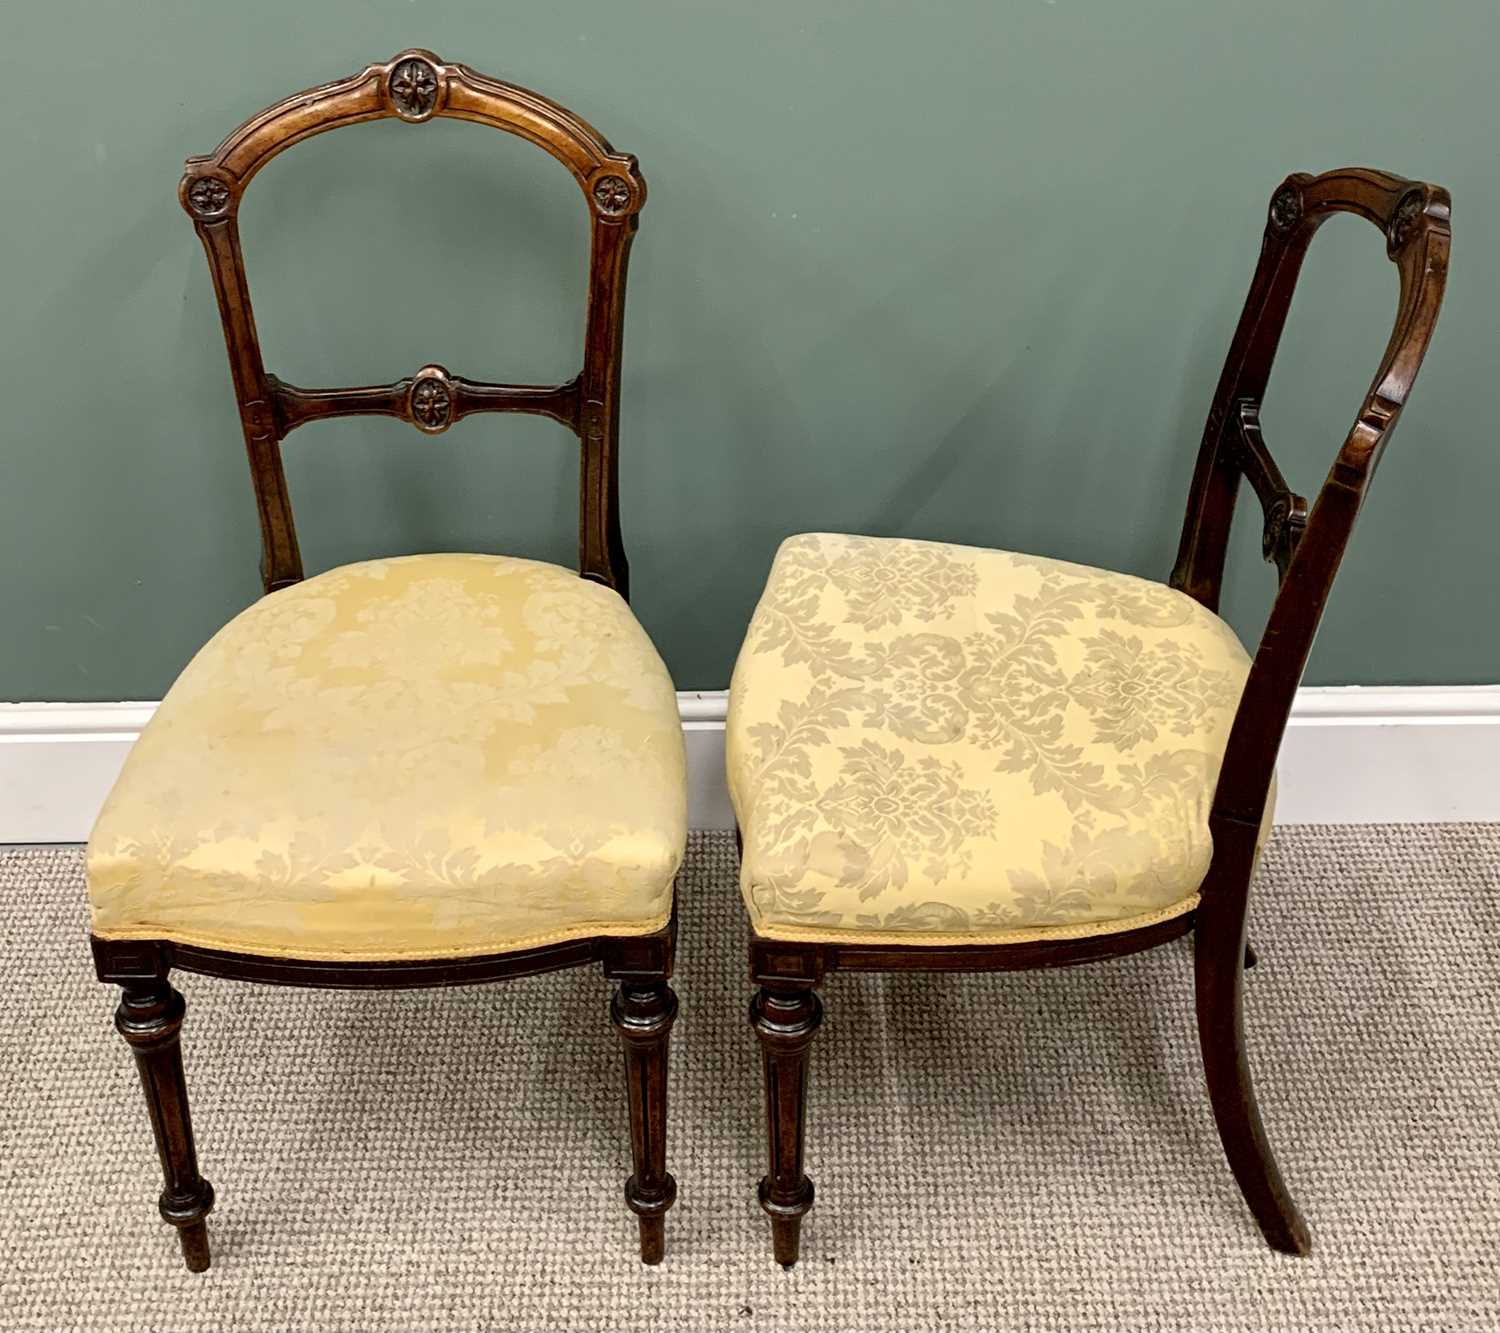 A PAIR OF ANTIQUE WALNUT PARLOUR CHAIRS with carved leaf detail and leaf pattern gold upholstery - Image 2 of 3